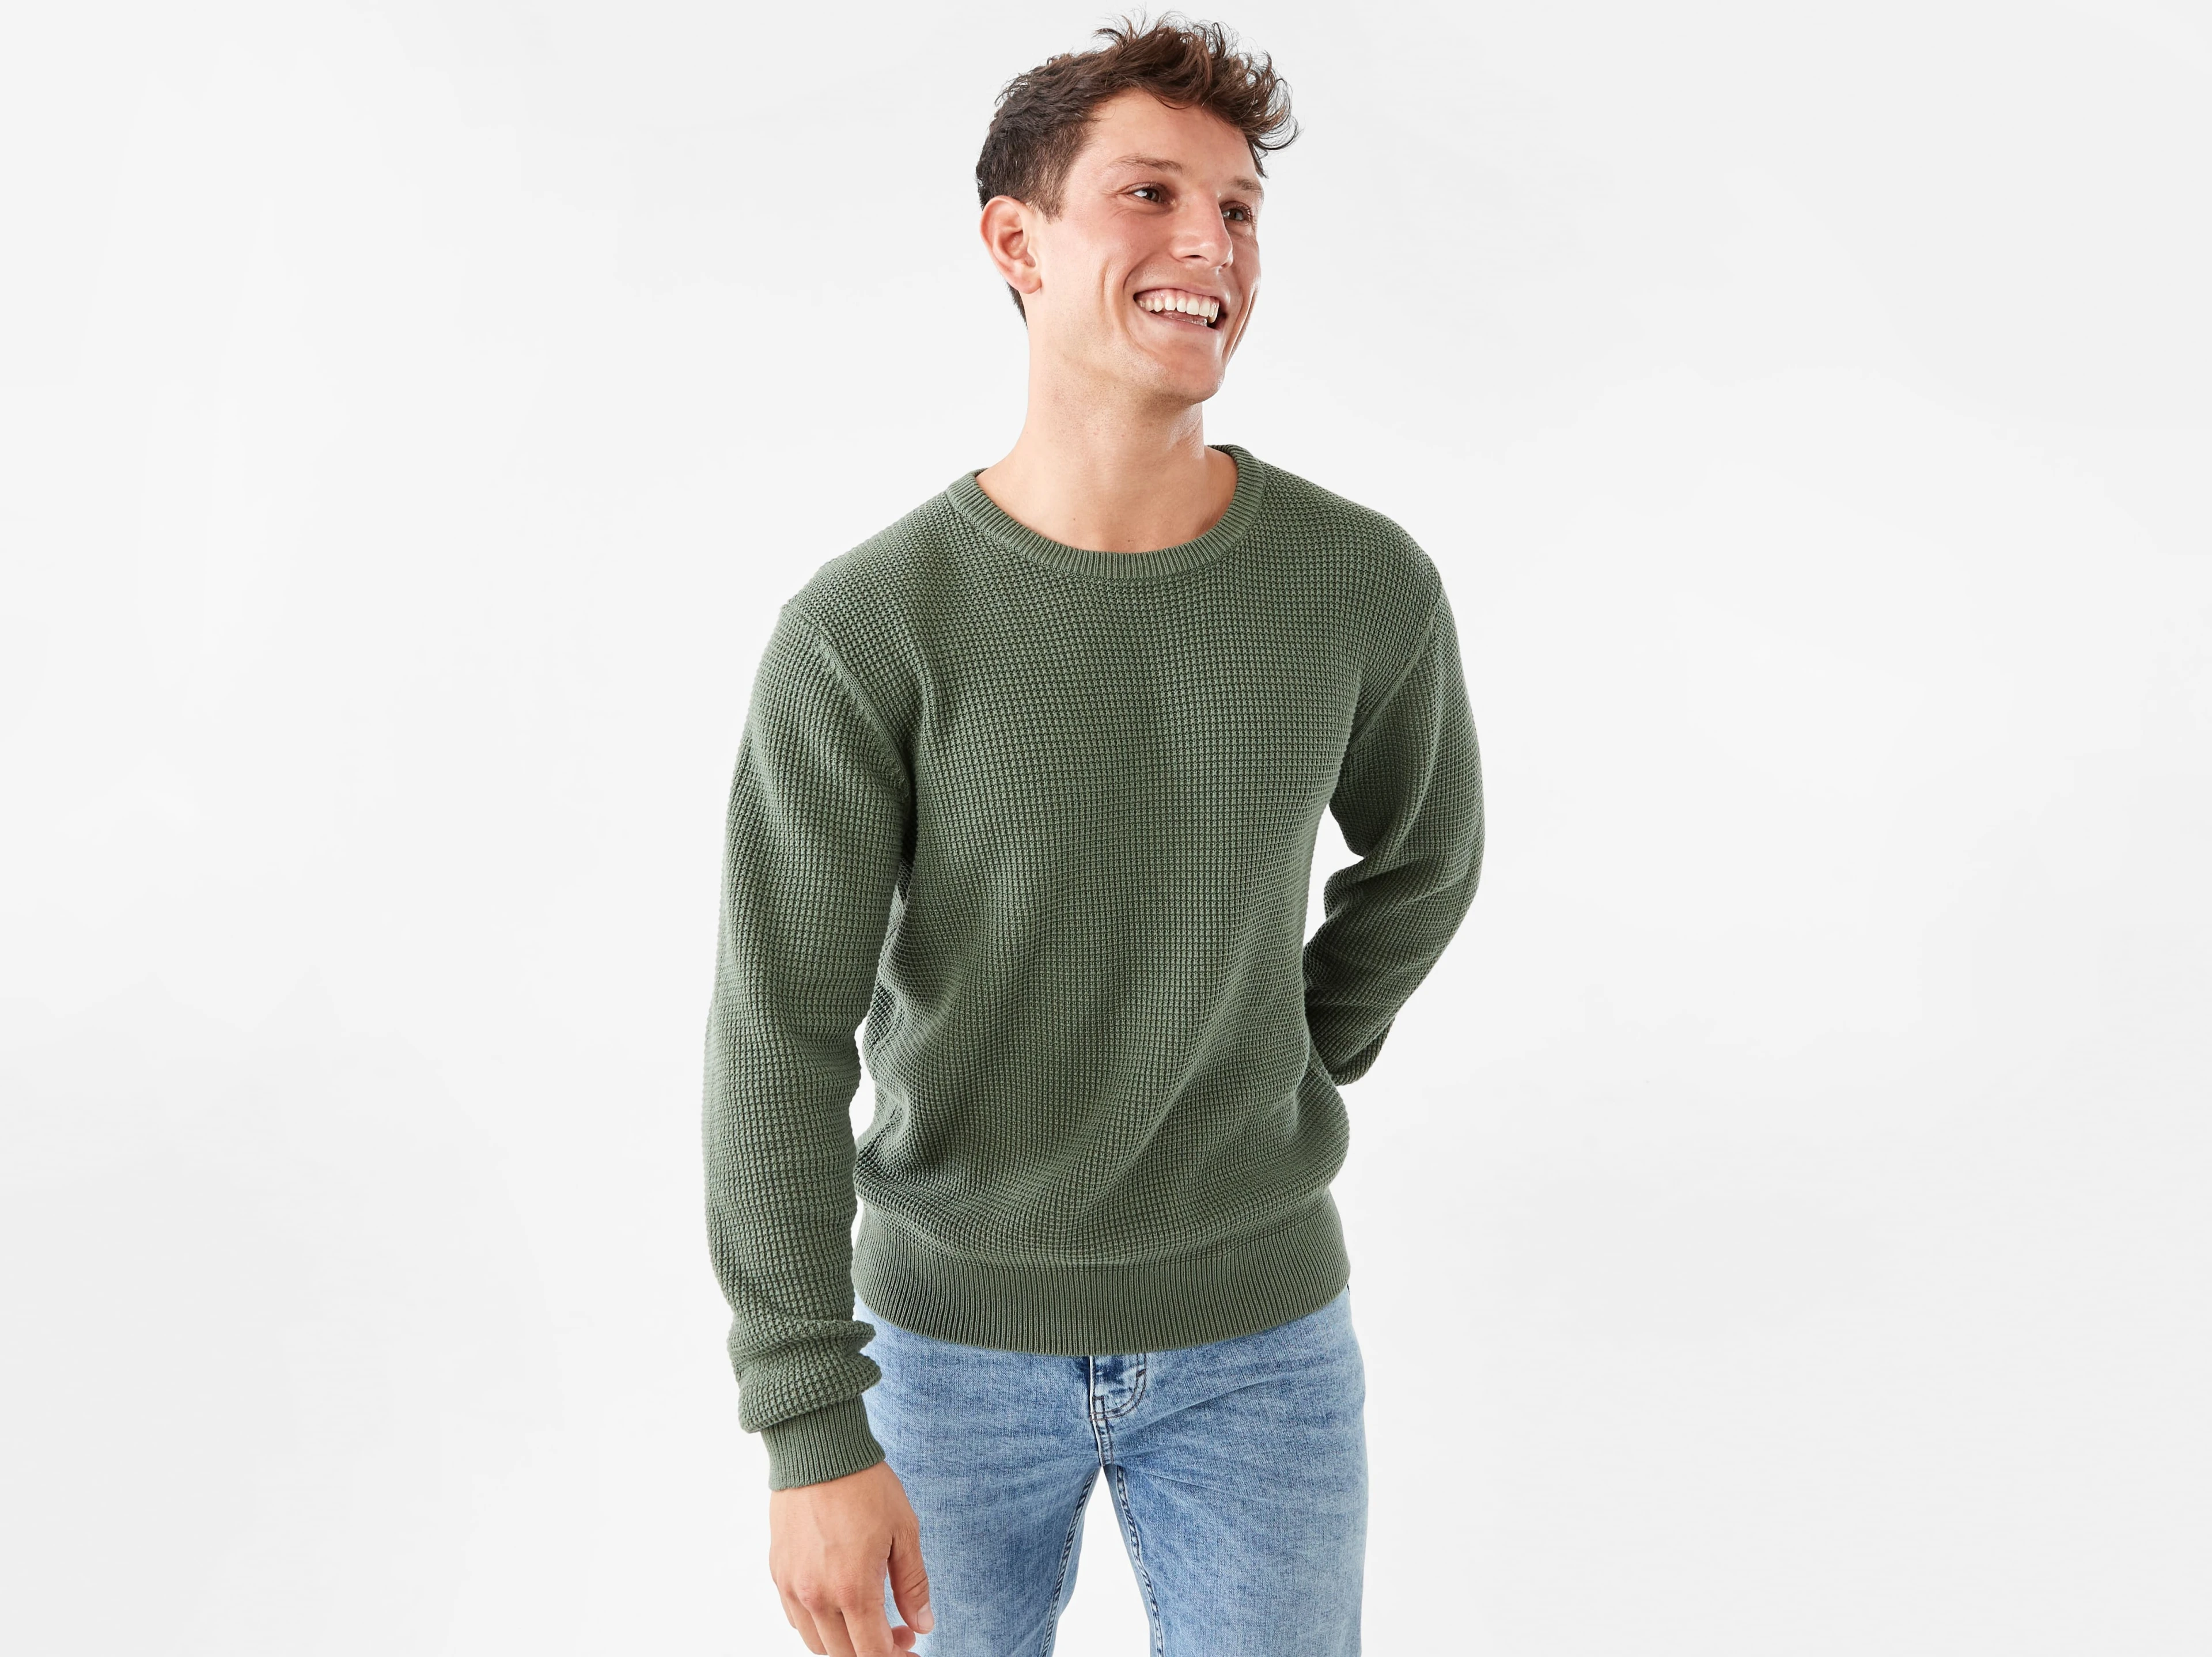 Wes Crew Neck Knit Jumper in g